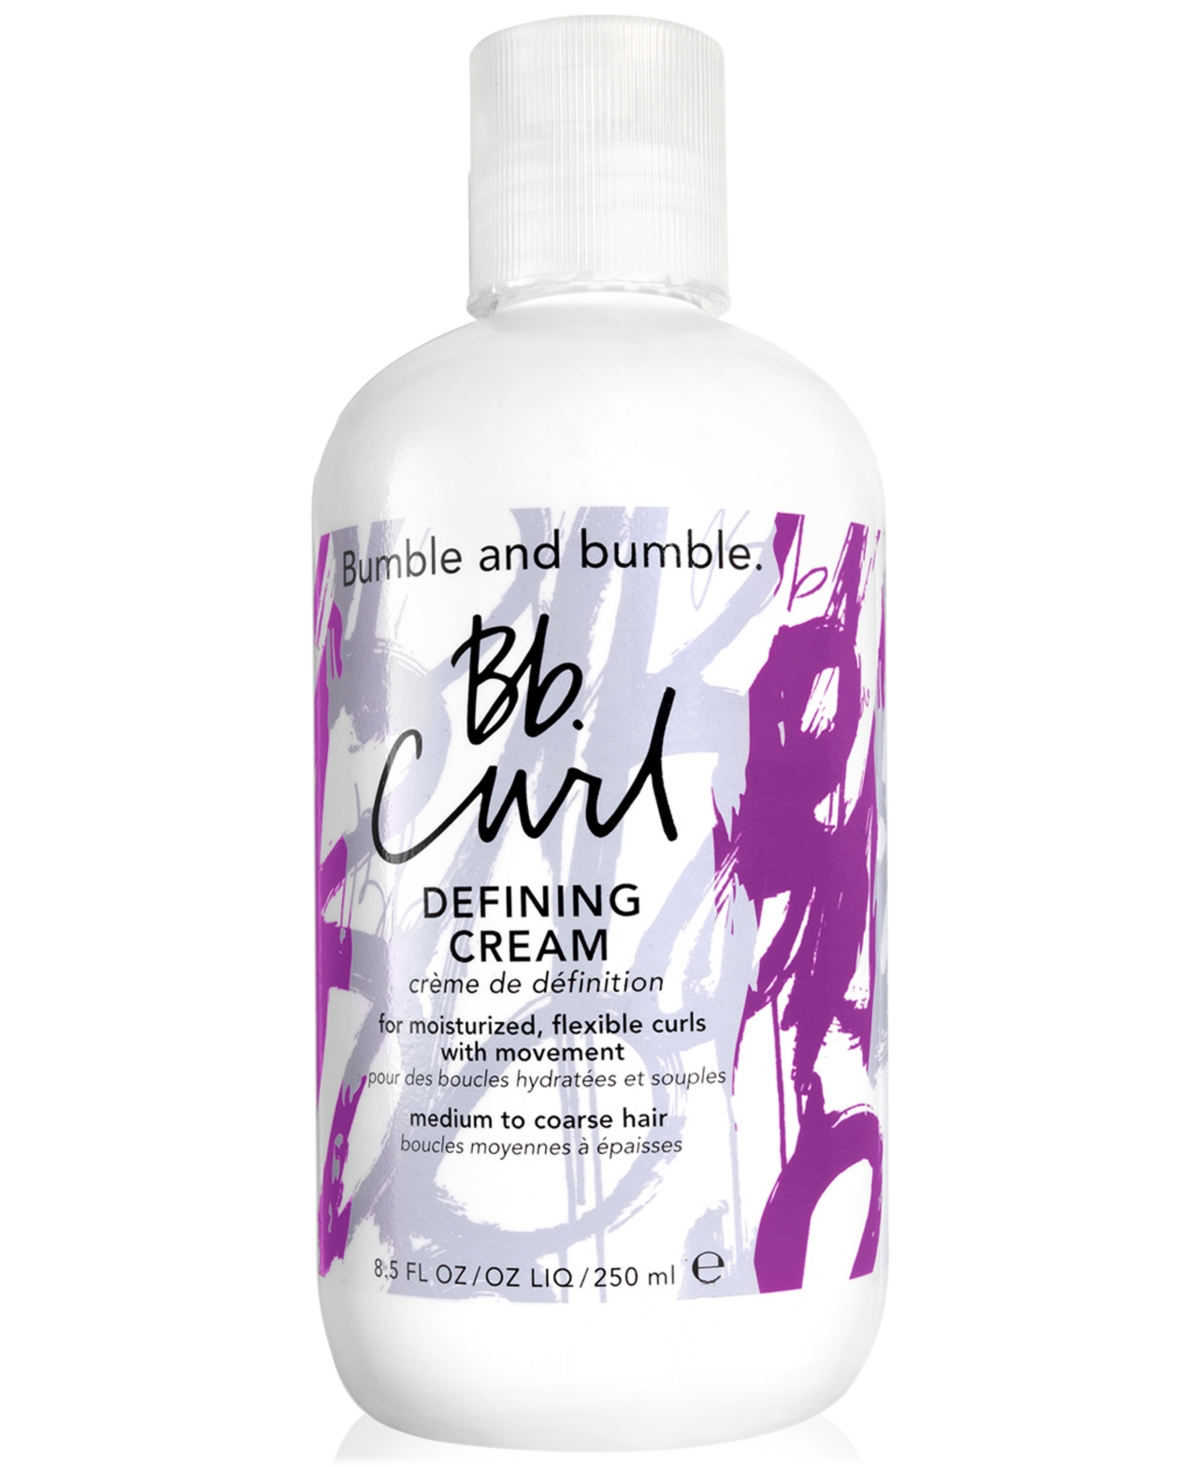 Bumble and Bumble Curl Defining Hair Styling Cream, 8.5 oz.